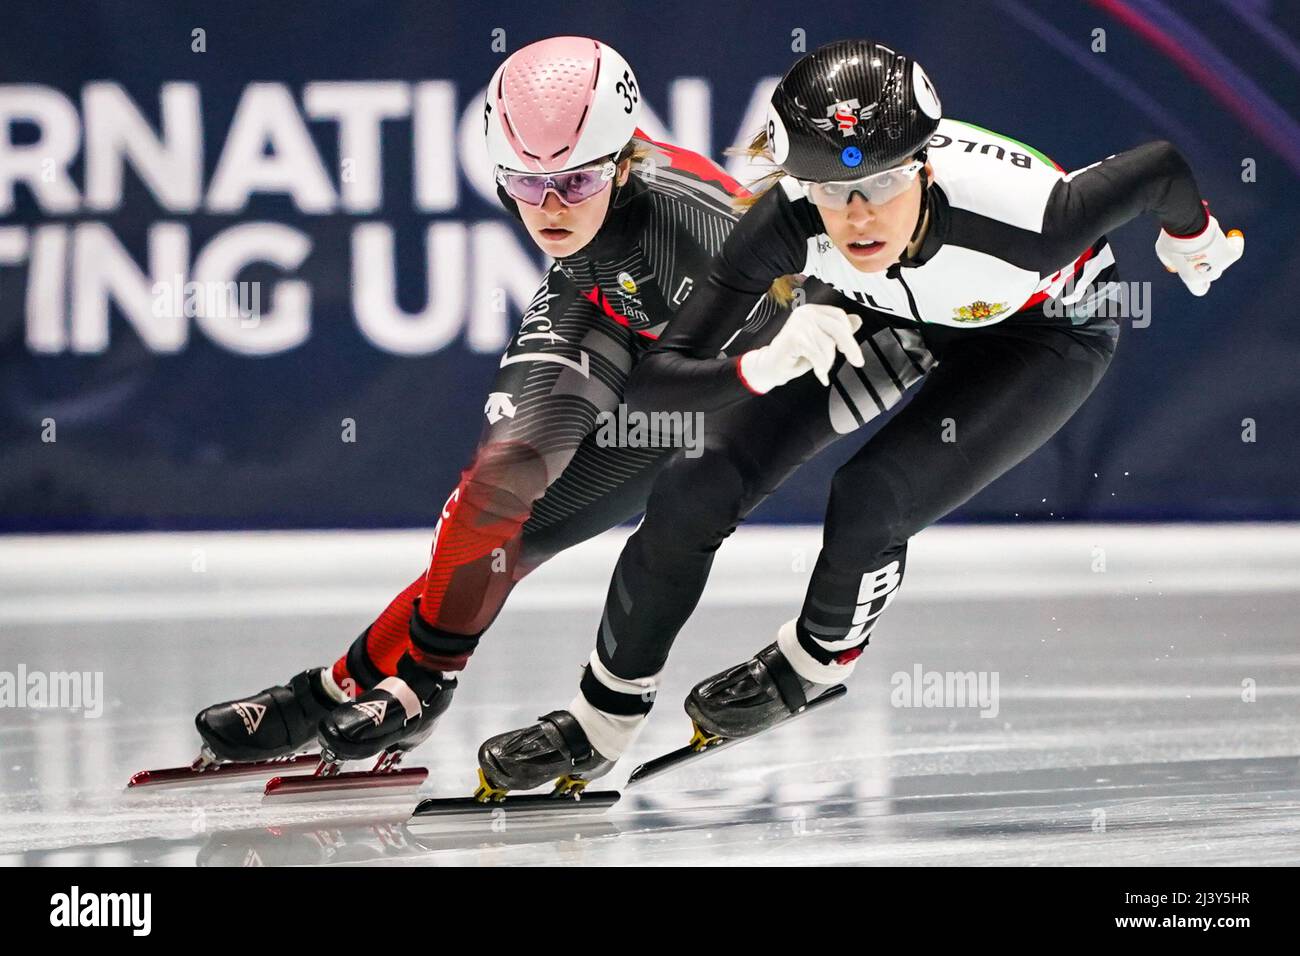 MONTREAL, CANADA - APRIL 10: Kim Boutin of Canada during Day 3 of the ISU World Short Track Championships at the Maurice Richard Arena on April 10, 2022 in Montreal, Canada (Photo by Andre Weening/Orange Pictures) Stock Photo